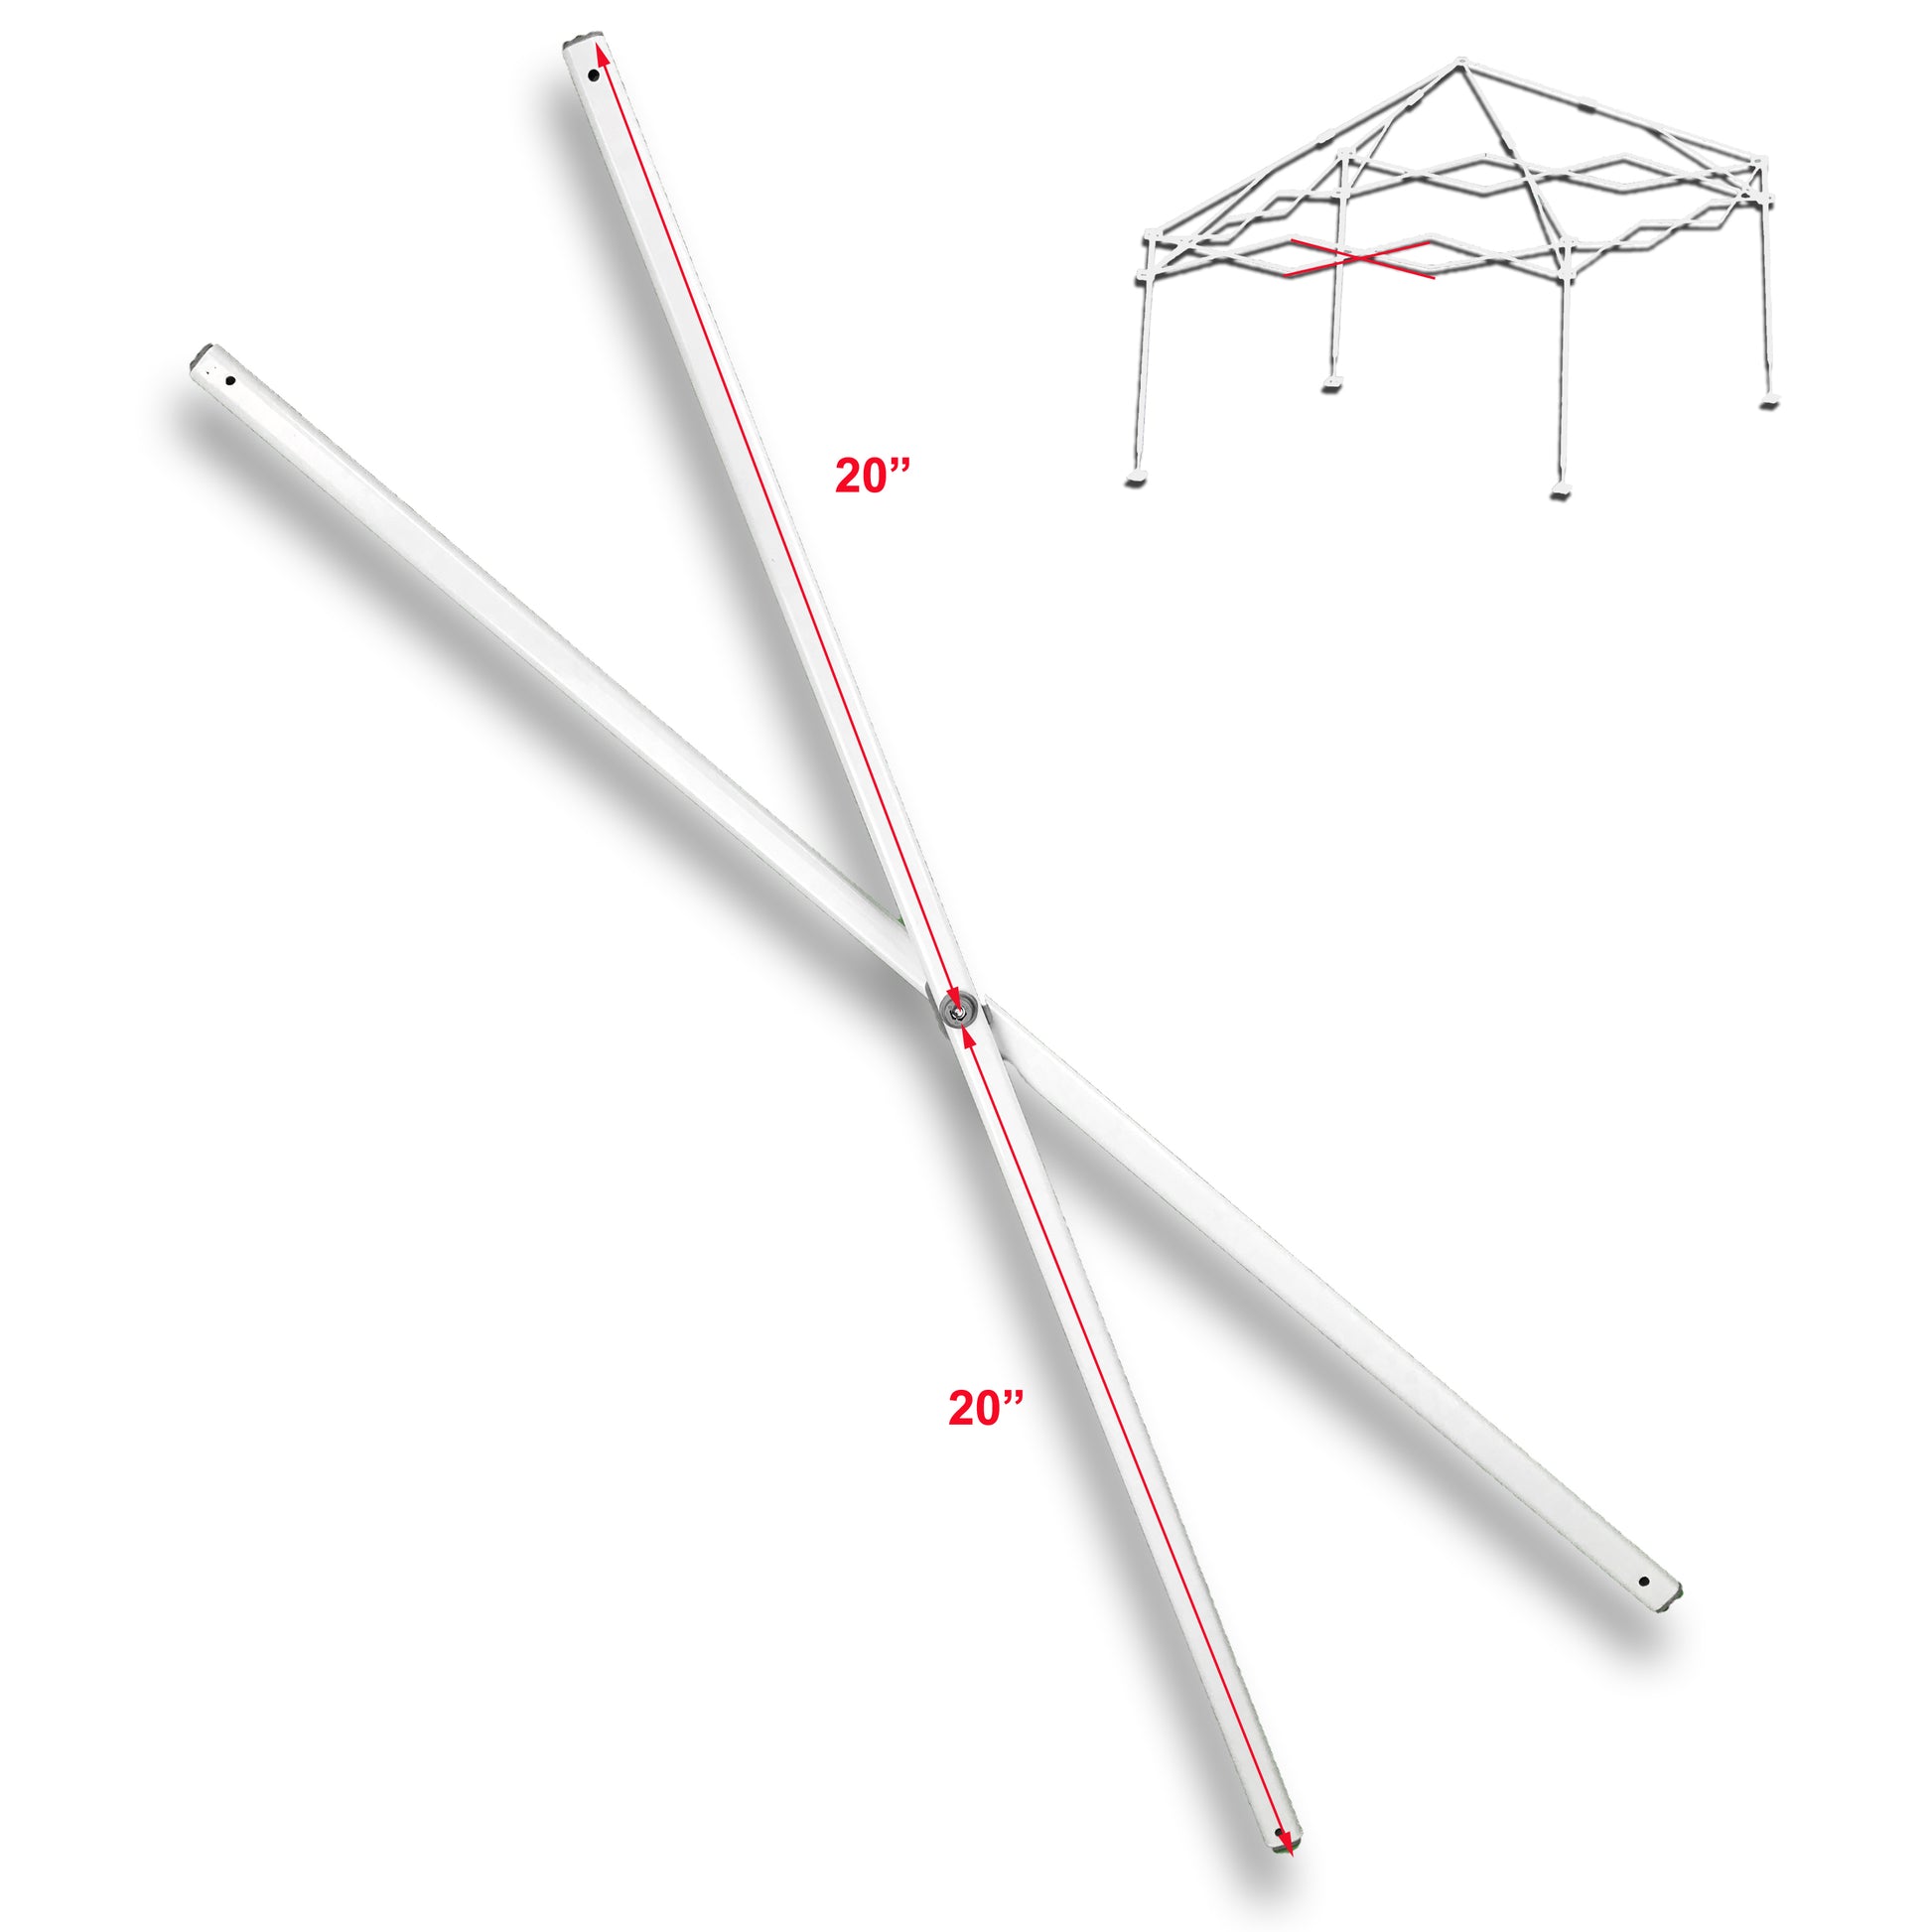 This photo showcases the E-Z UP Envoy 10' X 10' Instant Canopy Gazebo Middle TRUSS Bar Replacement Part. Additionally, it is highlighted that the distance from the edge to the center on both sides is uniform, measuring 20 inches on each side. In the background, a frame is visible, indicating in red where this spare part is positioned within the canopy structure. This truss bar replacement is vital for maintaining the canopy's stability and ensuring a symmetrical and secure setup for your outdoor shelter.